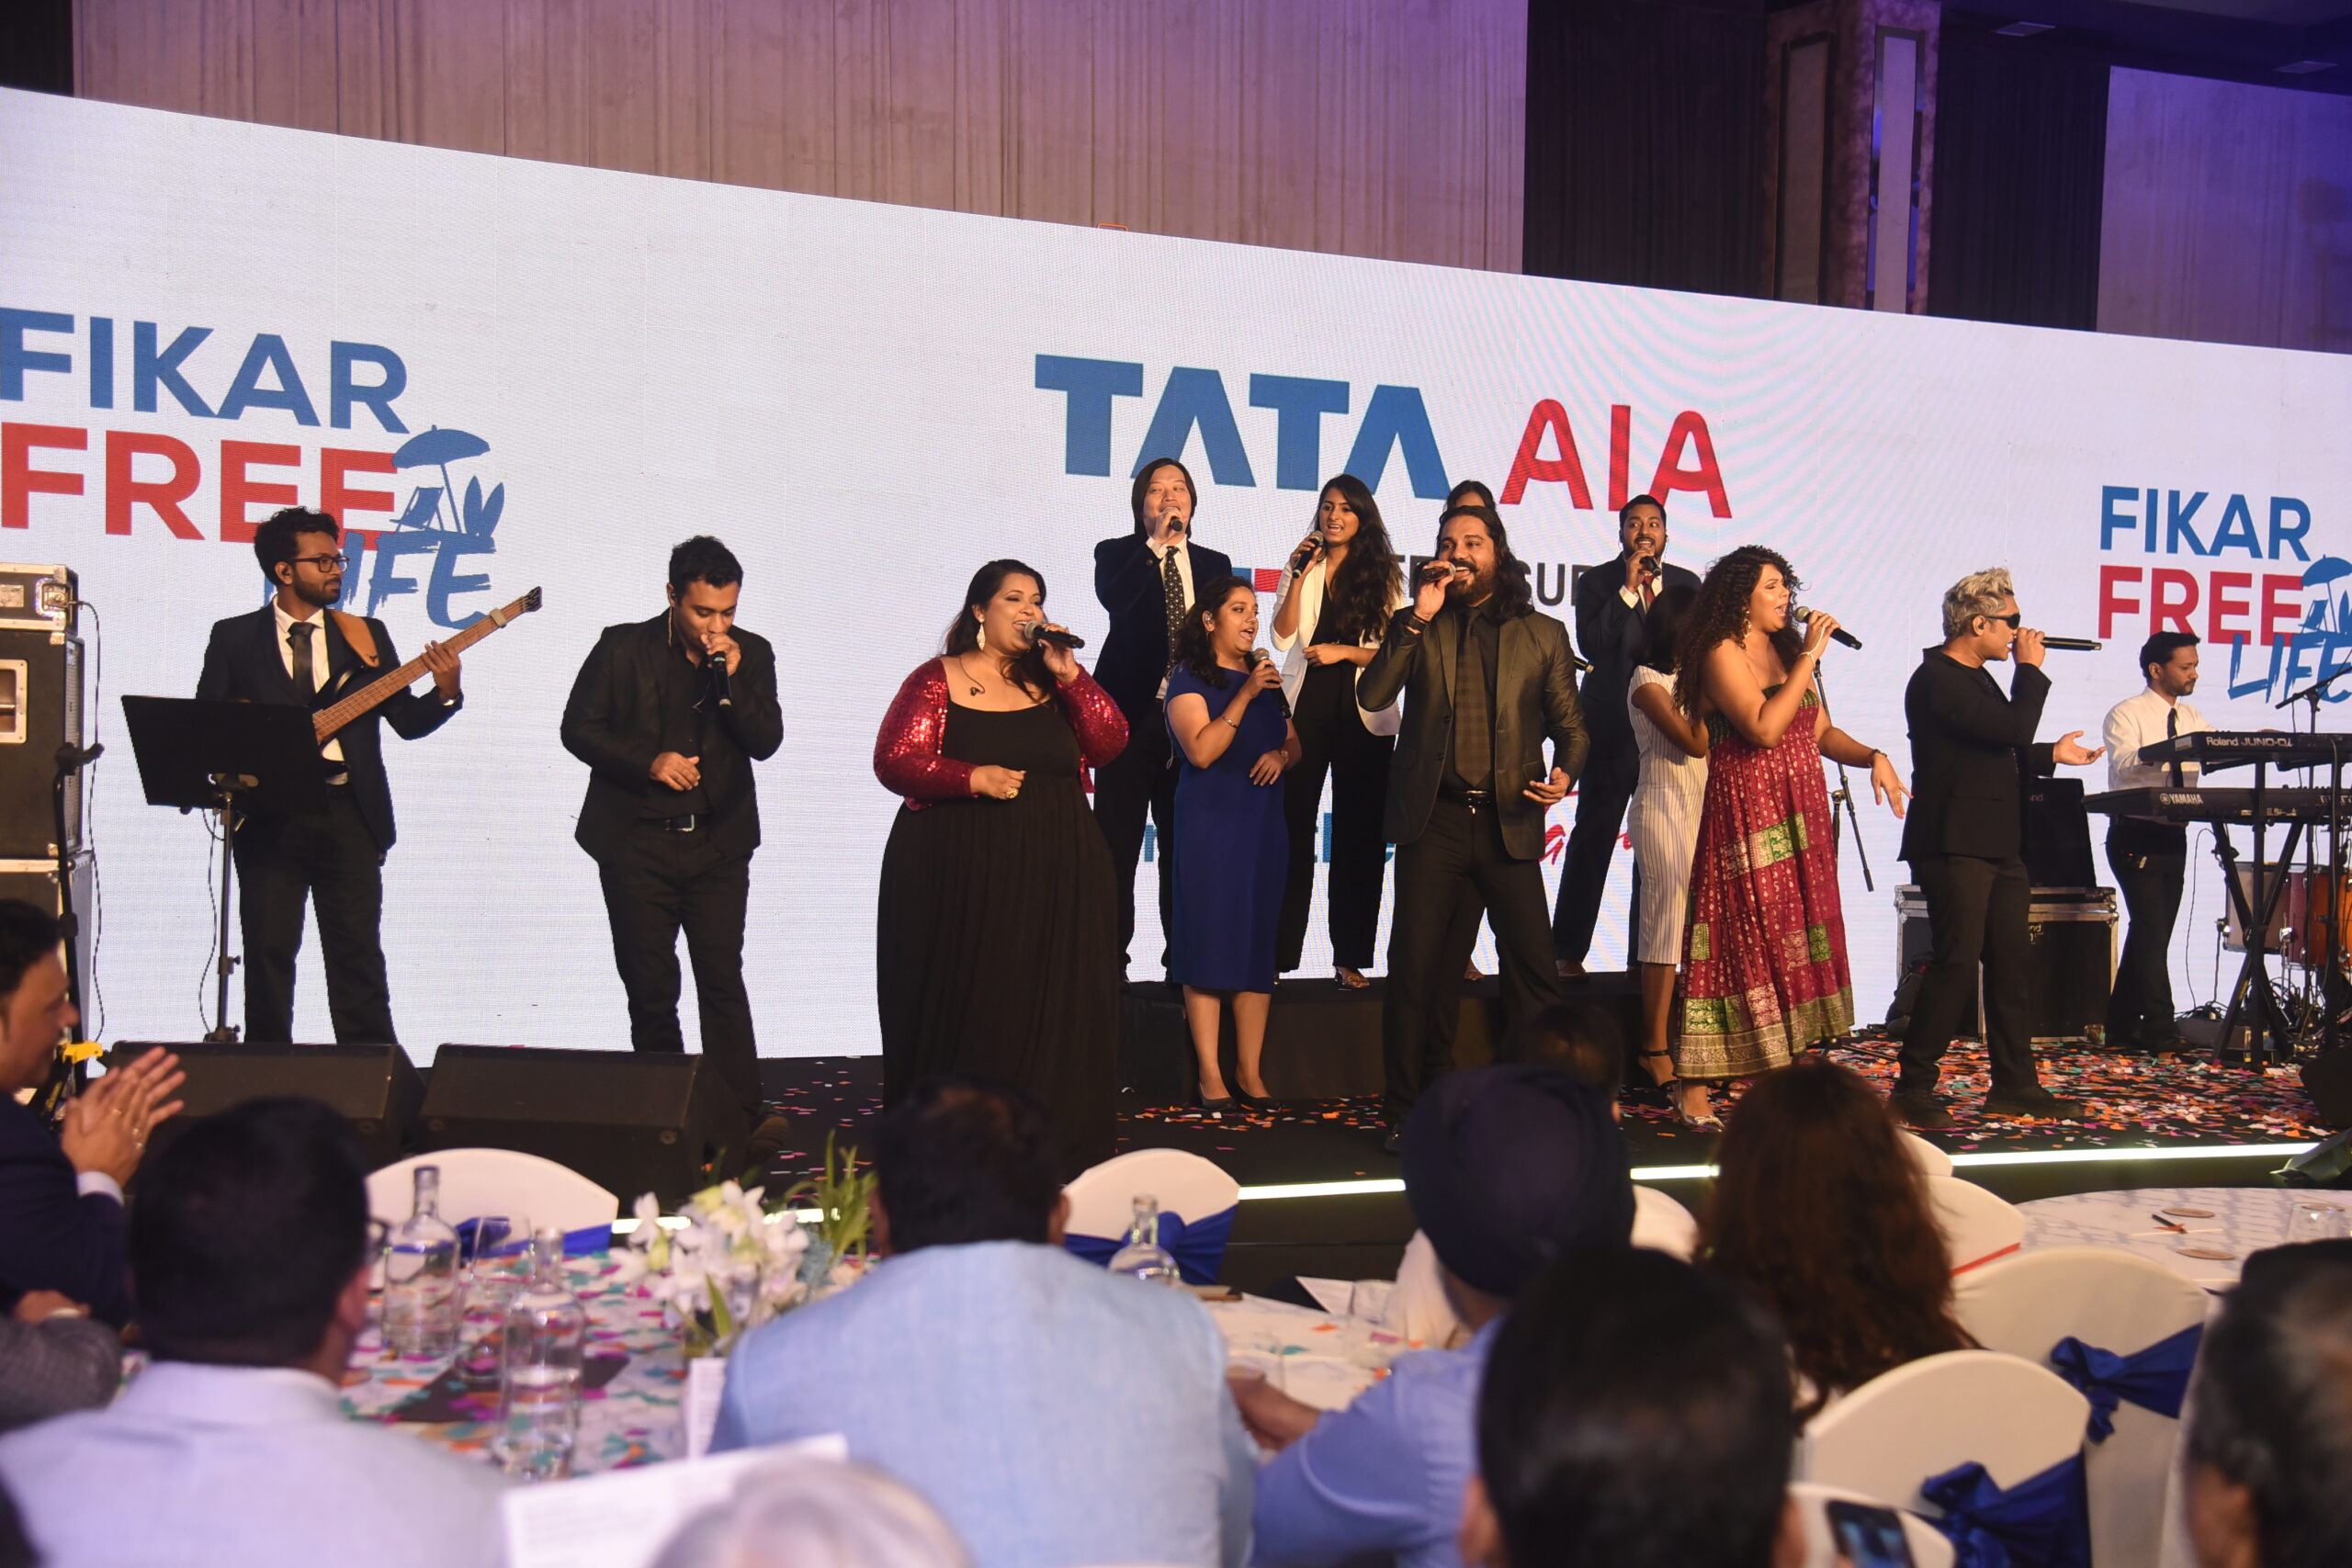 Raaga Trippin performing at a corporate event in Mumbai